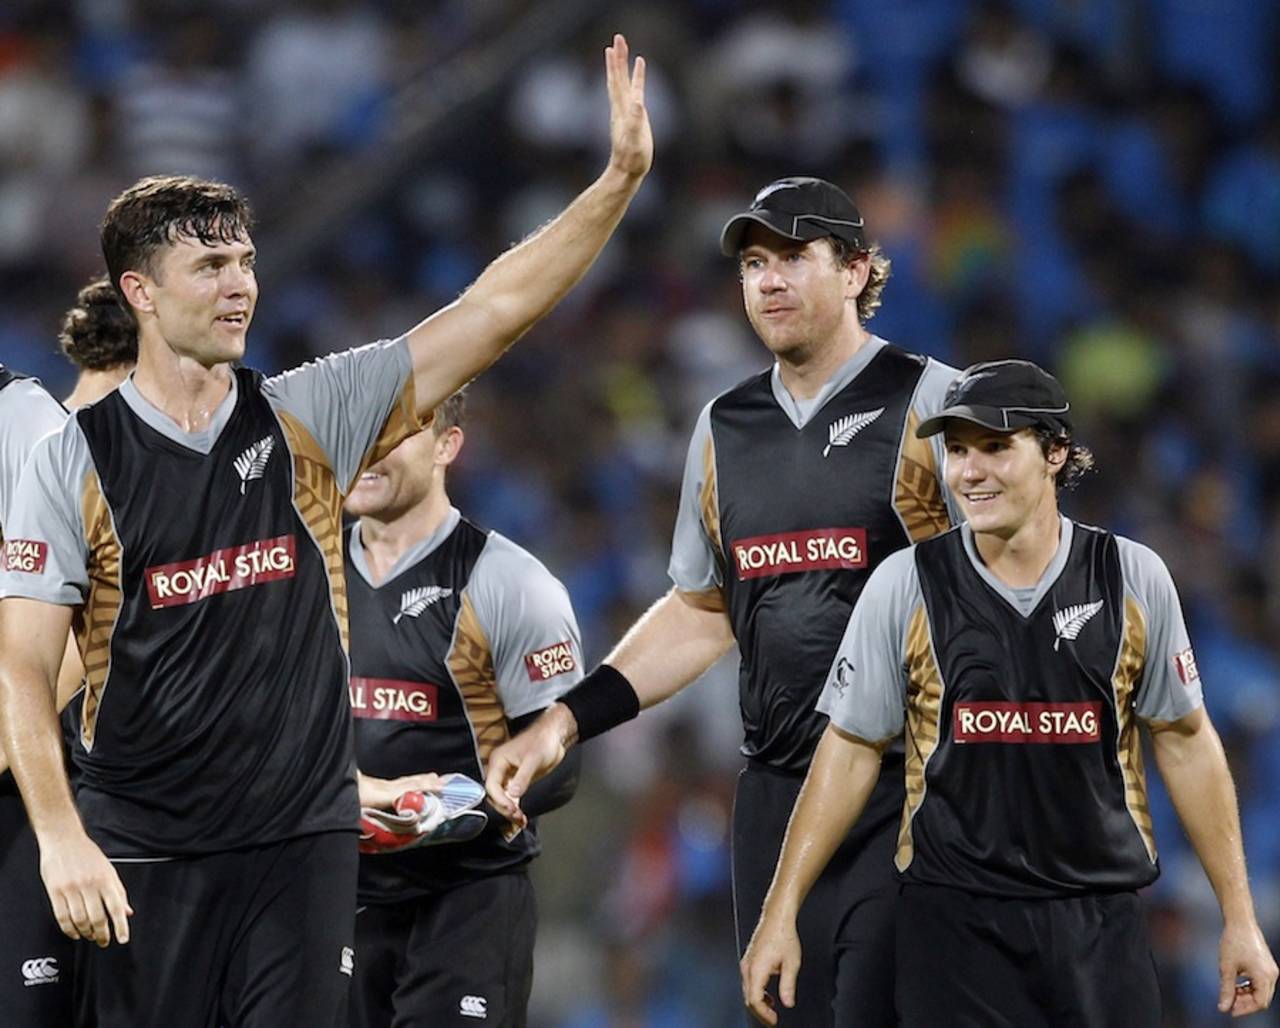 James Franklin raises his arm after bowling a tight last over, India v New Zealand, 2nd T20I, Chennai, September 11, 2012